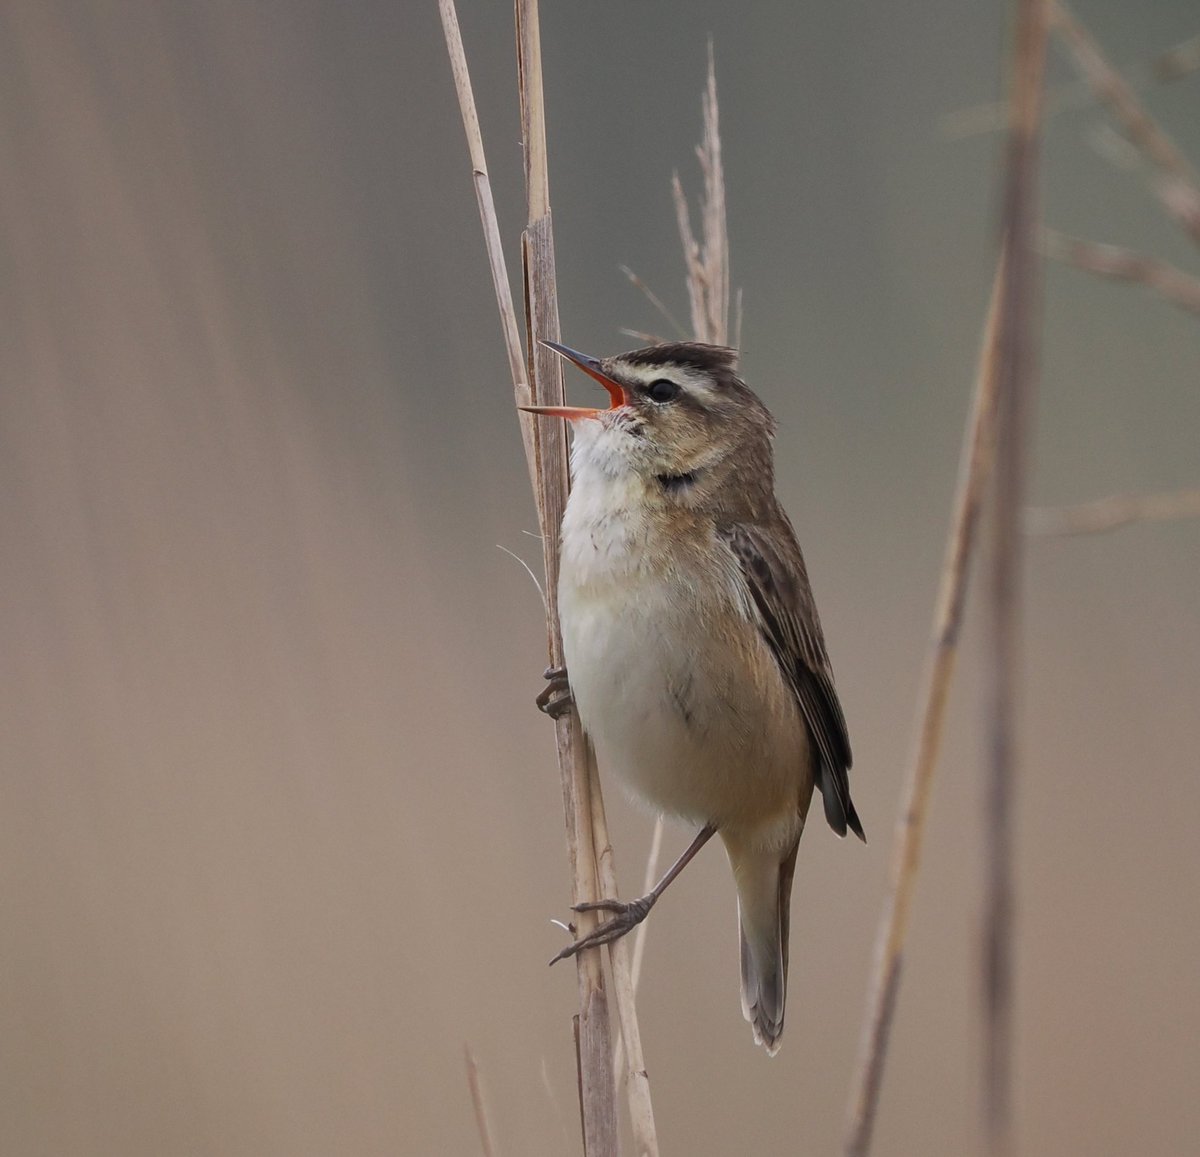 Sedge Warbler at full volume! This bird repeatedly climbed reeds beside the boardwalk at @RSPBMinsmere in order to sing #birds #birdphotography #wildlife #wildlifephotography #nature #NaturePhotography @Natures_Voice @suffolkwildlife @BtoSuffolk @NatureUK @BBCSpringwatch